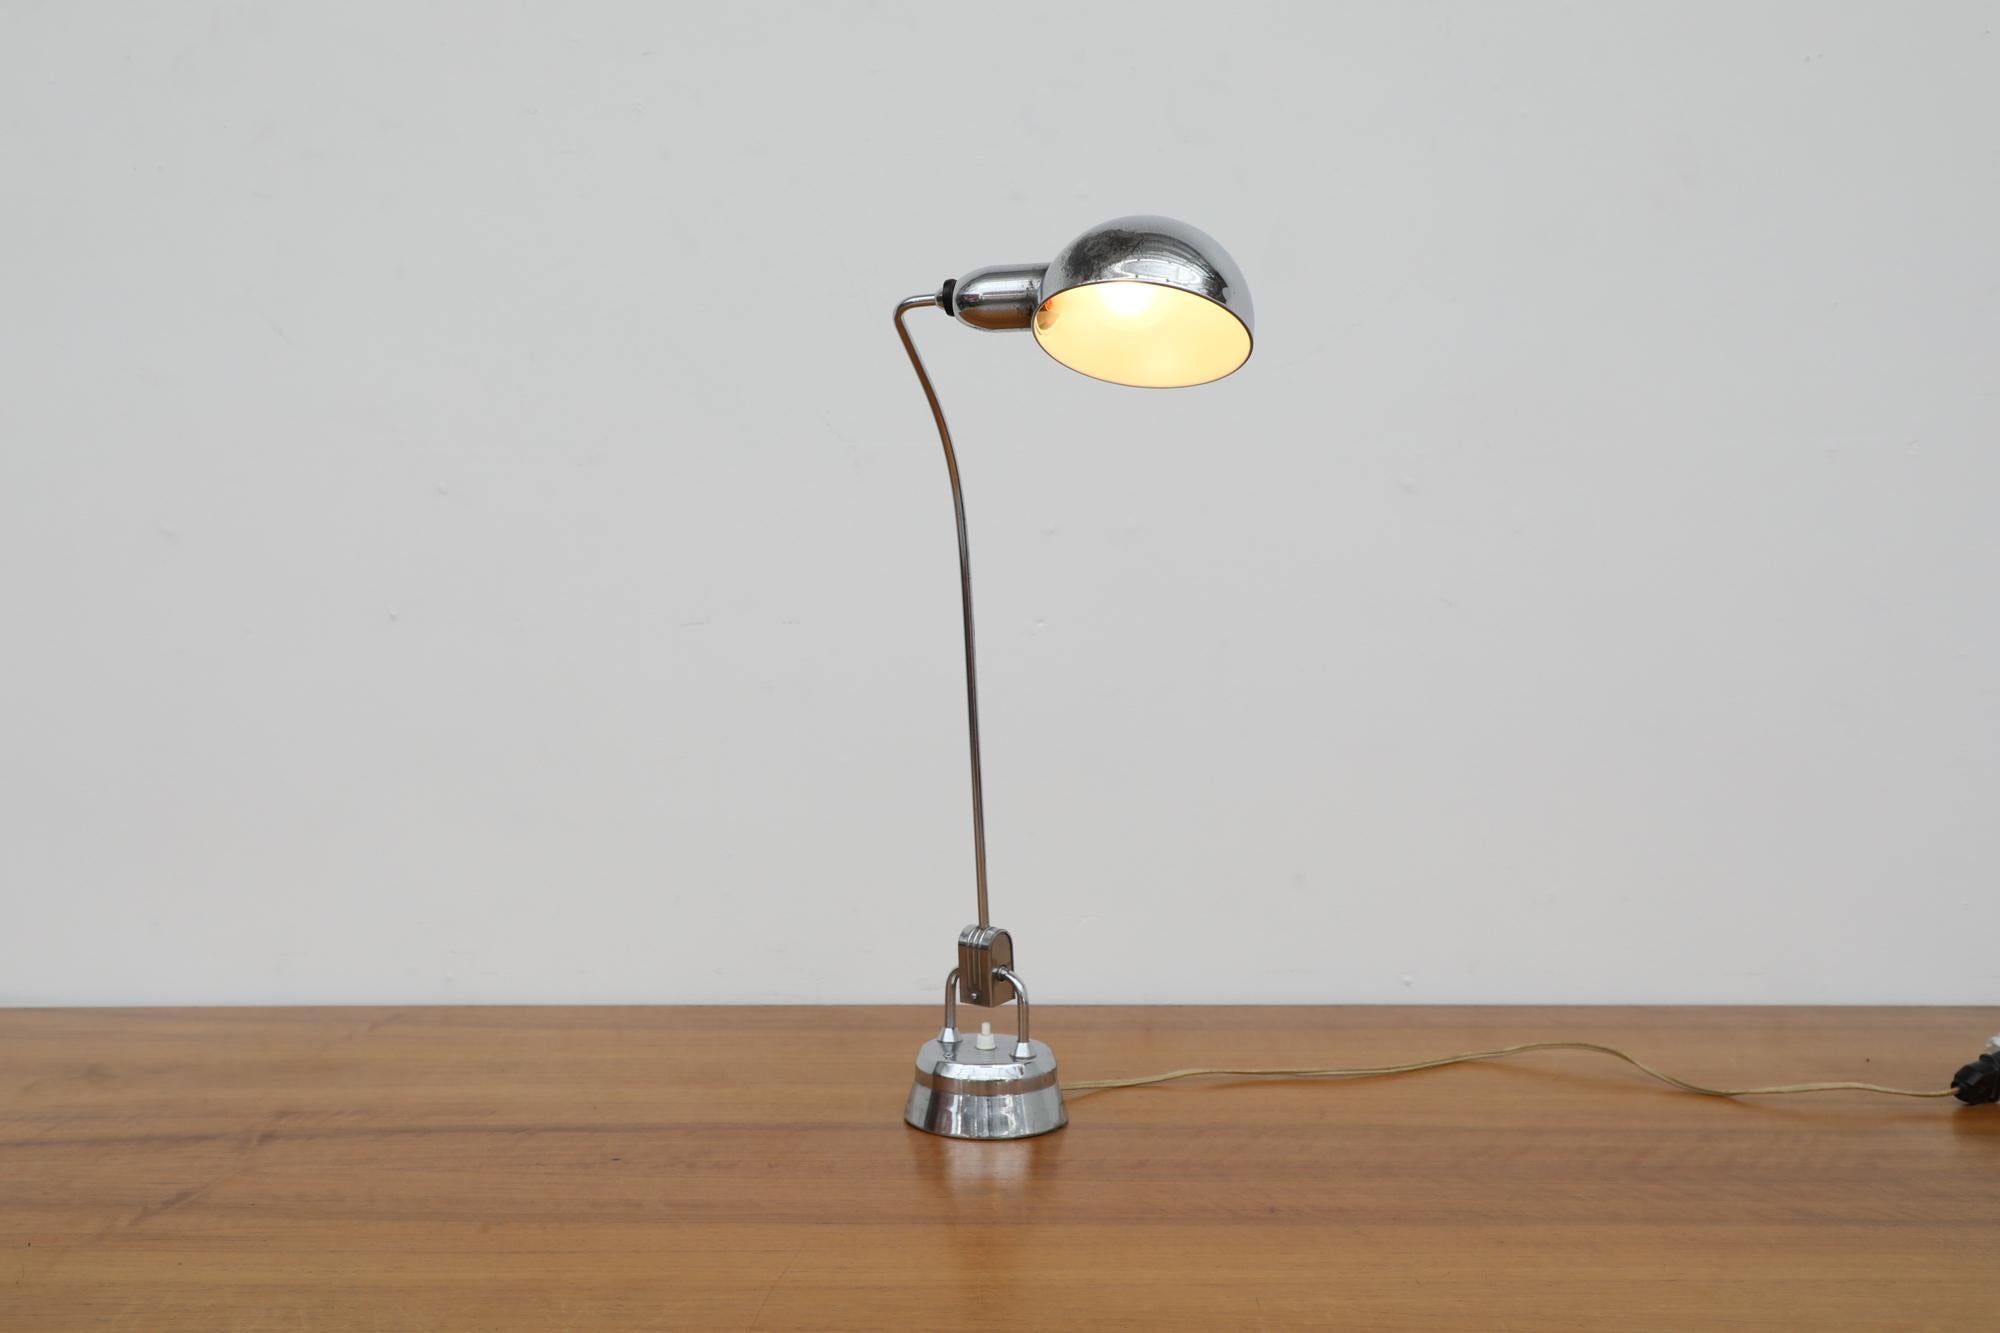 Original 1940's 'Model 600' desk lamp designed by Yves Jujeau and Pierre and André Mounique for JUMO. Selected by Charlotte Perriand for the exhibition “Le Bazar” at the Musée des Arts decoratives (Museum of Decorative Arts ) of Paris in 1949.